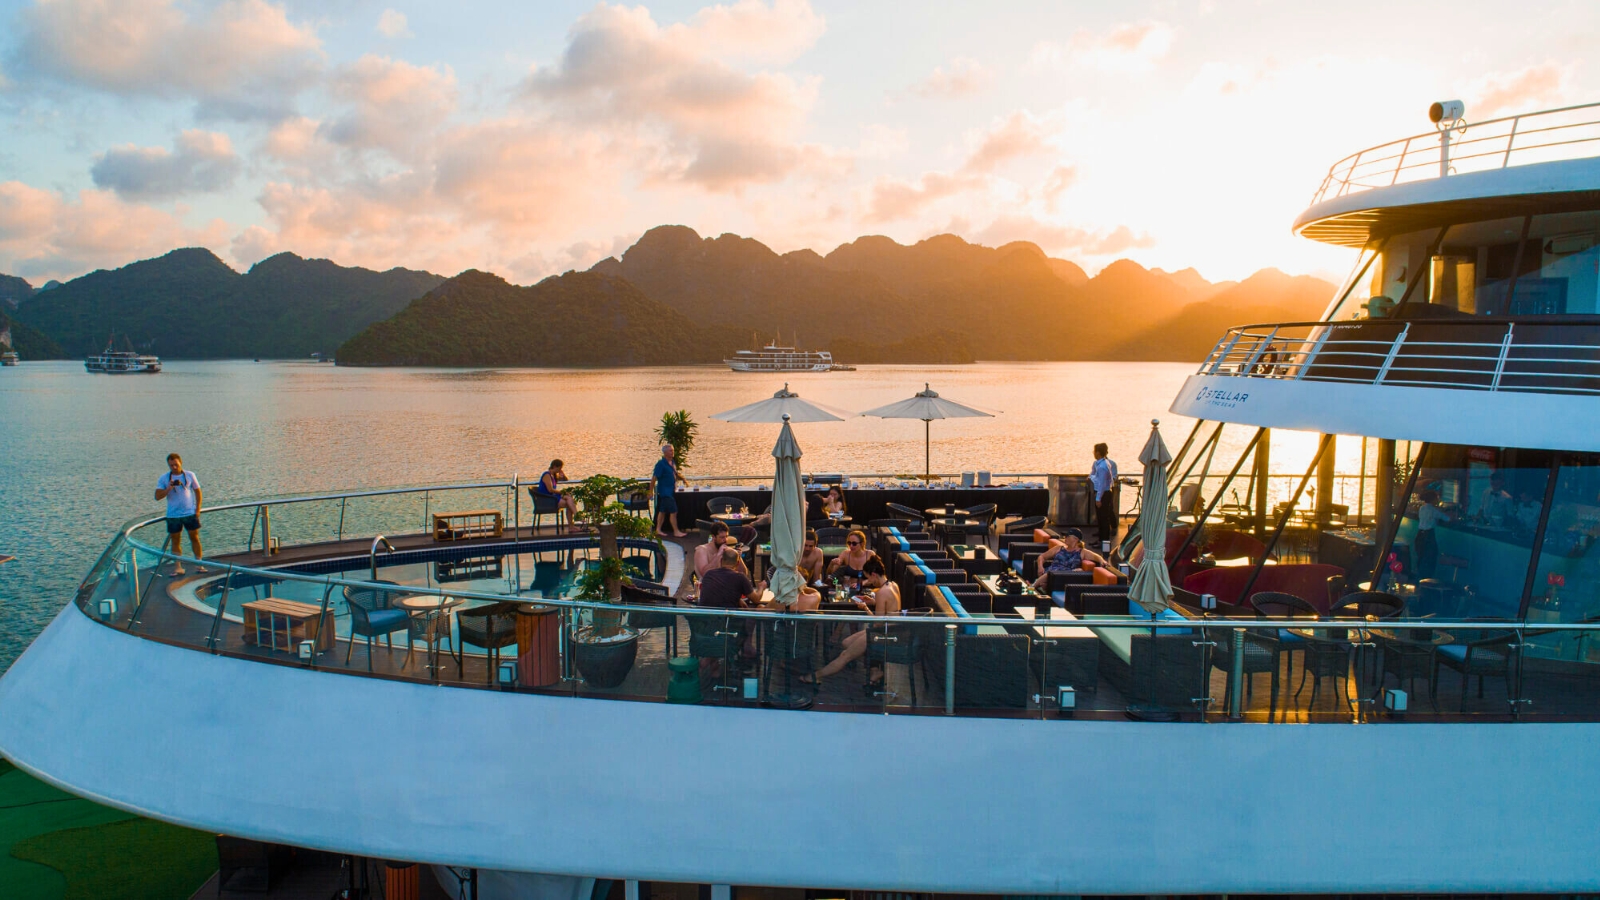 Day 4 Enjoy The Glorious Sunset And Entertainment On Halong Bay Overnight Cruise